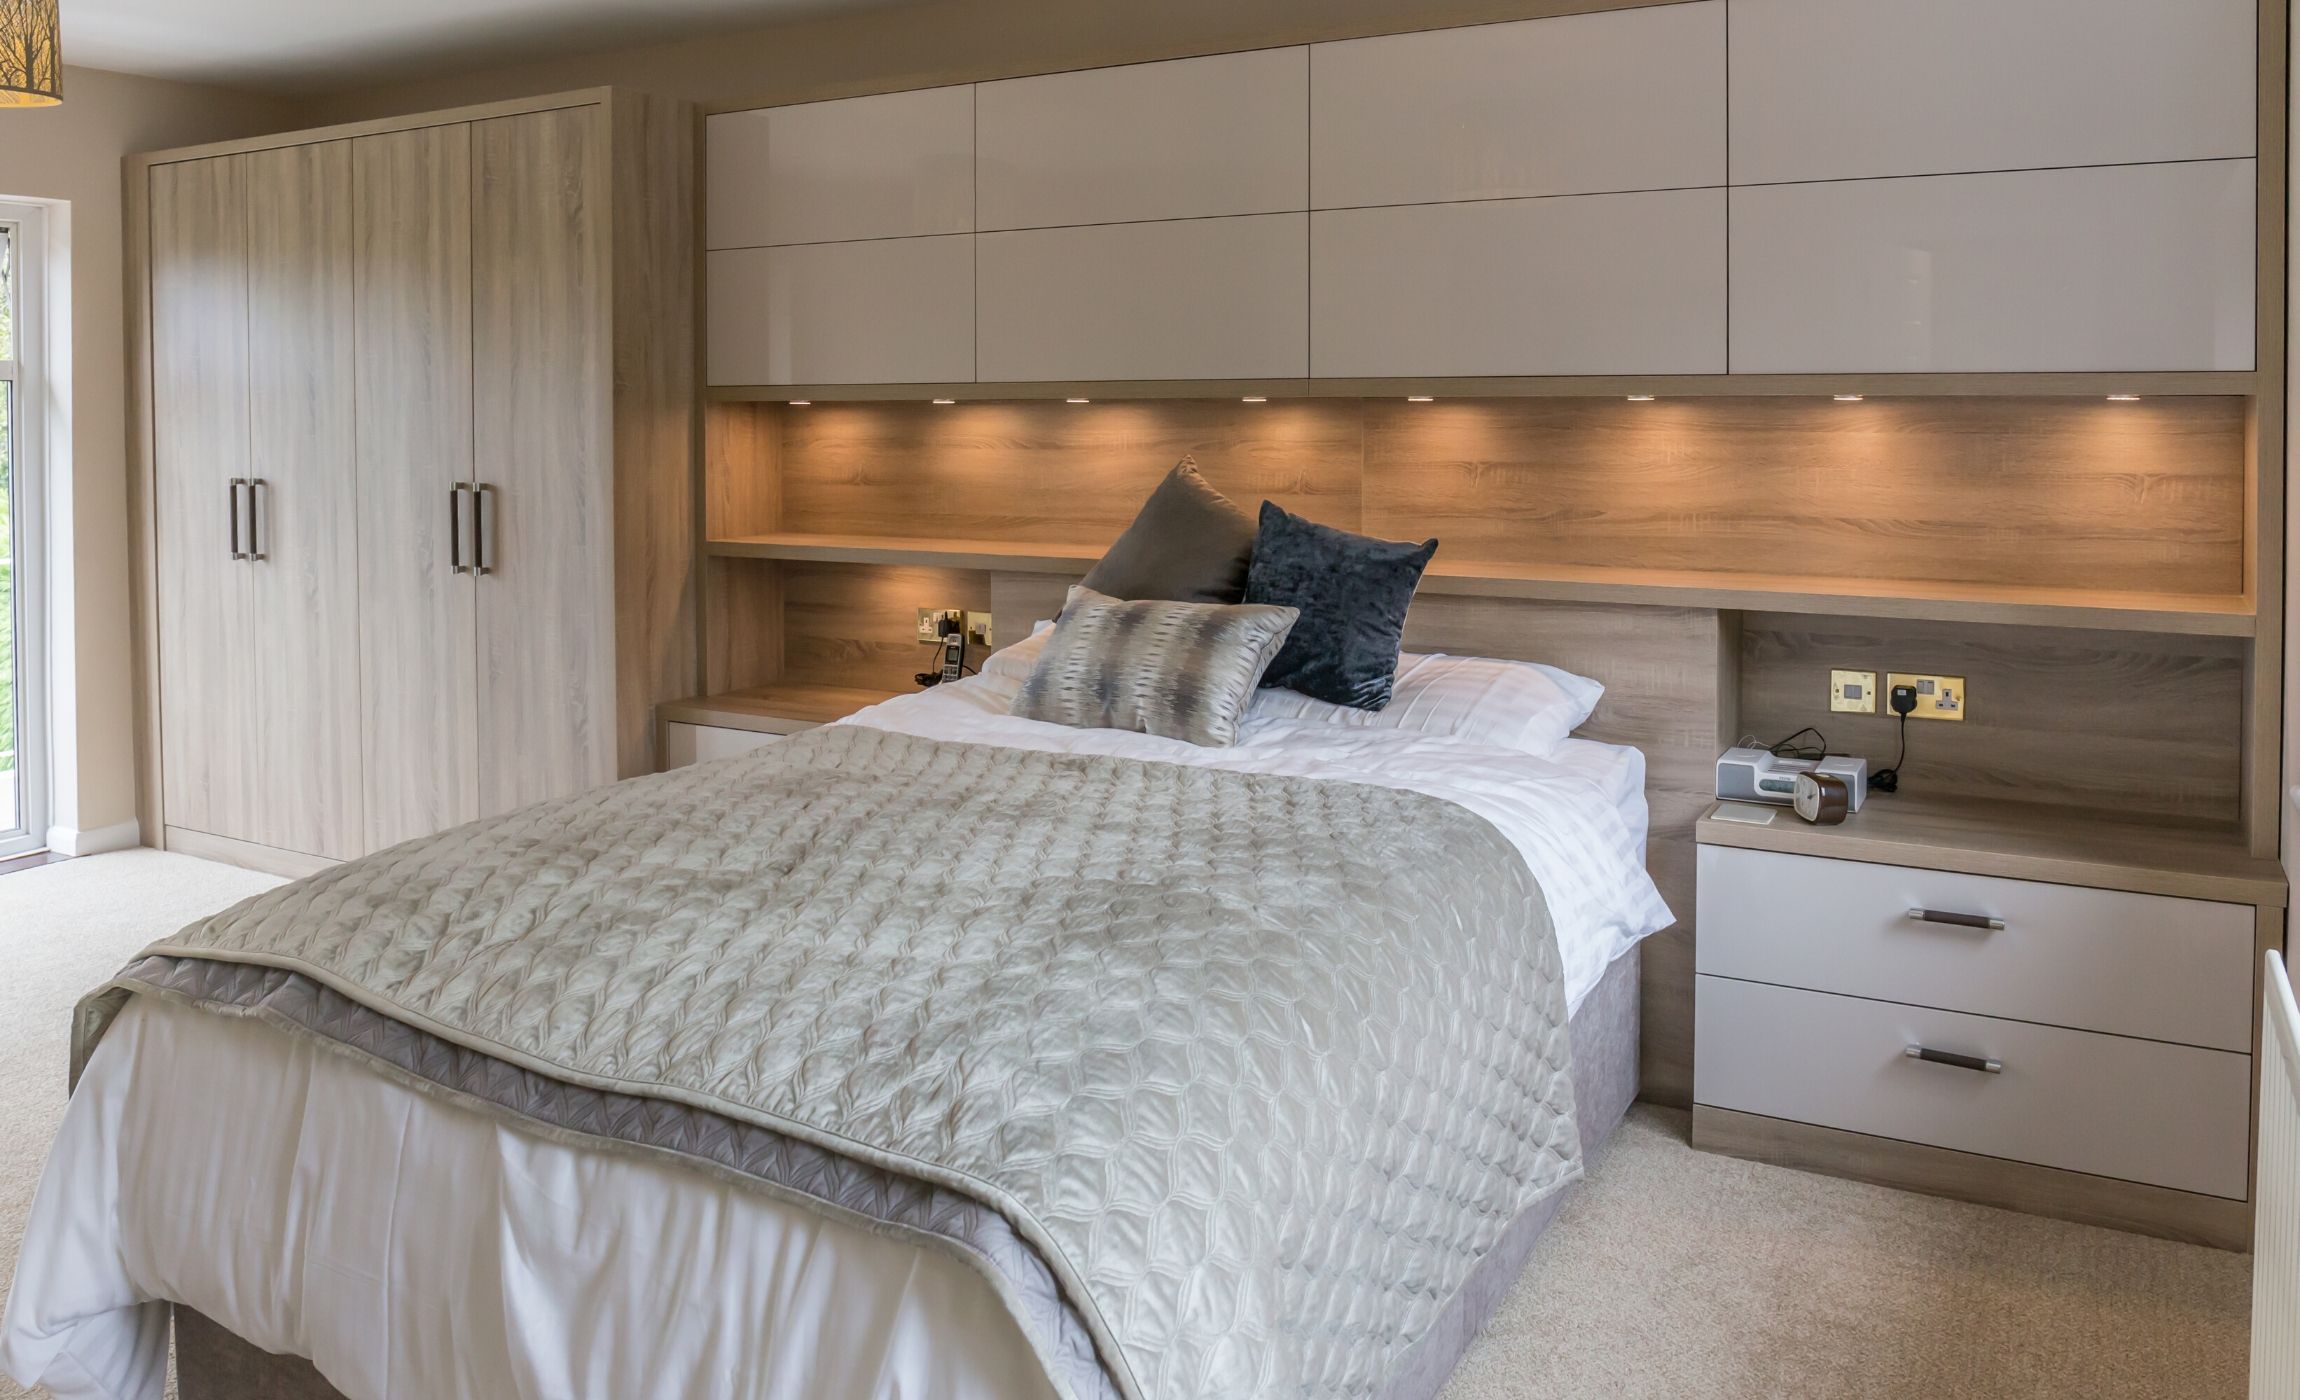 fitted bedroom furniture uk price